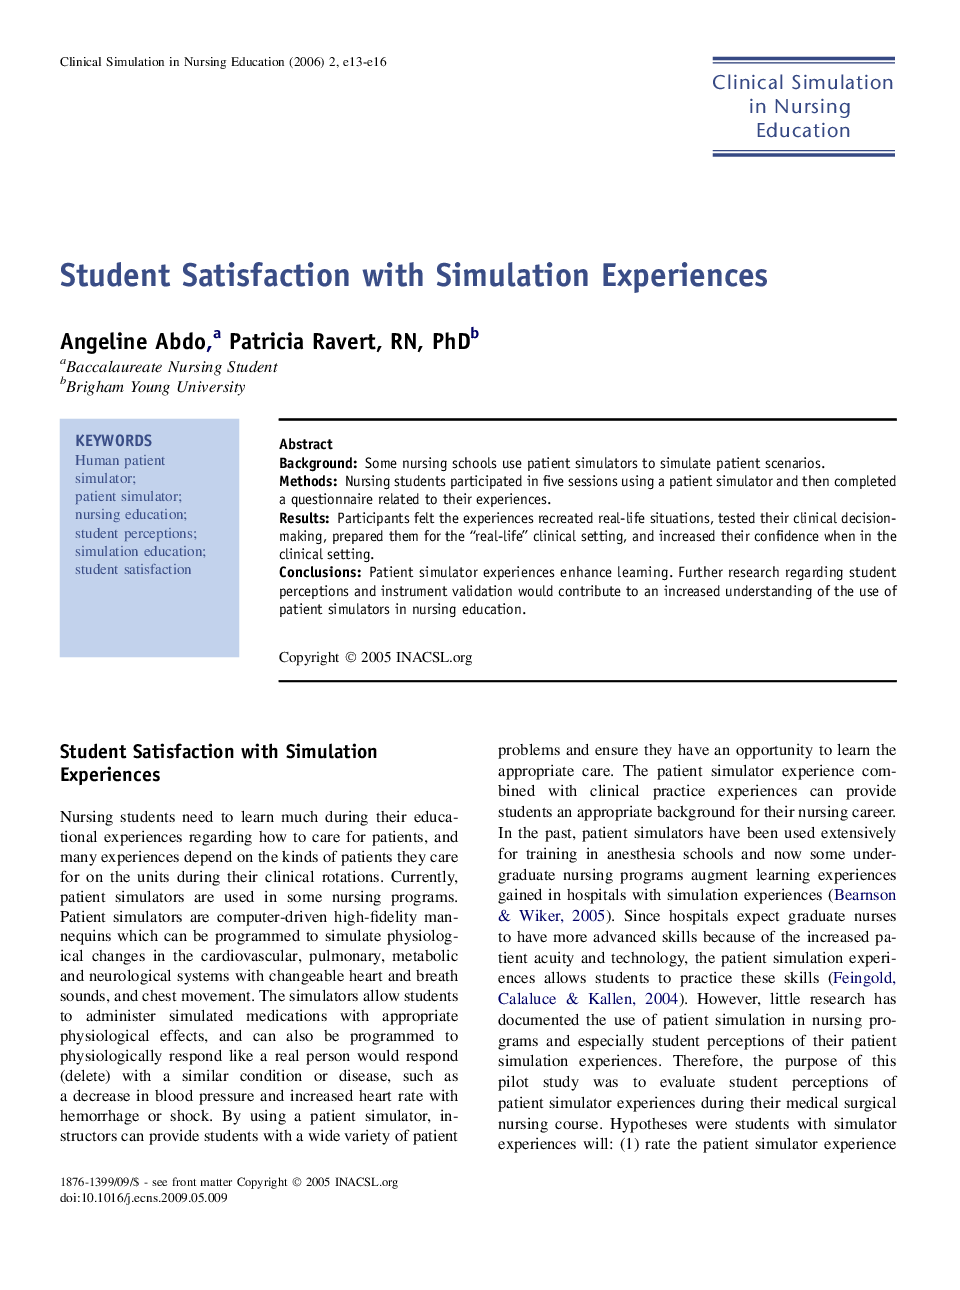 Student Satisfaction with Simulation Experiences